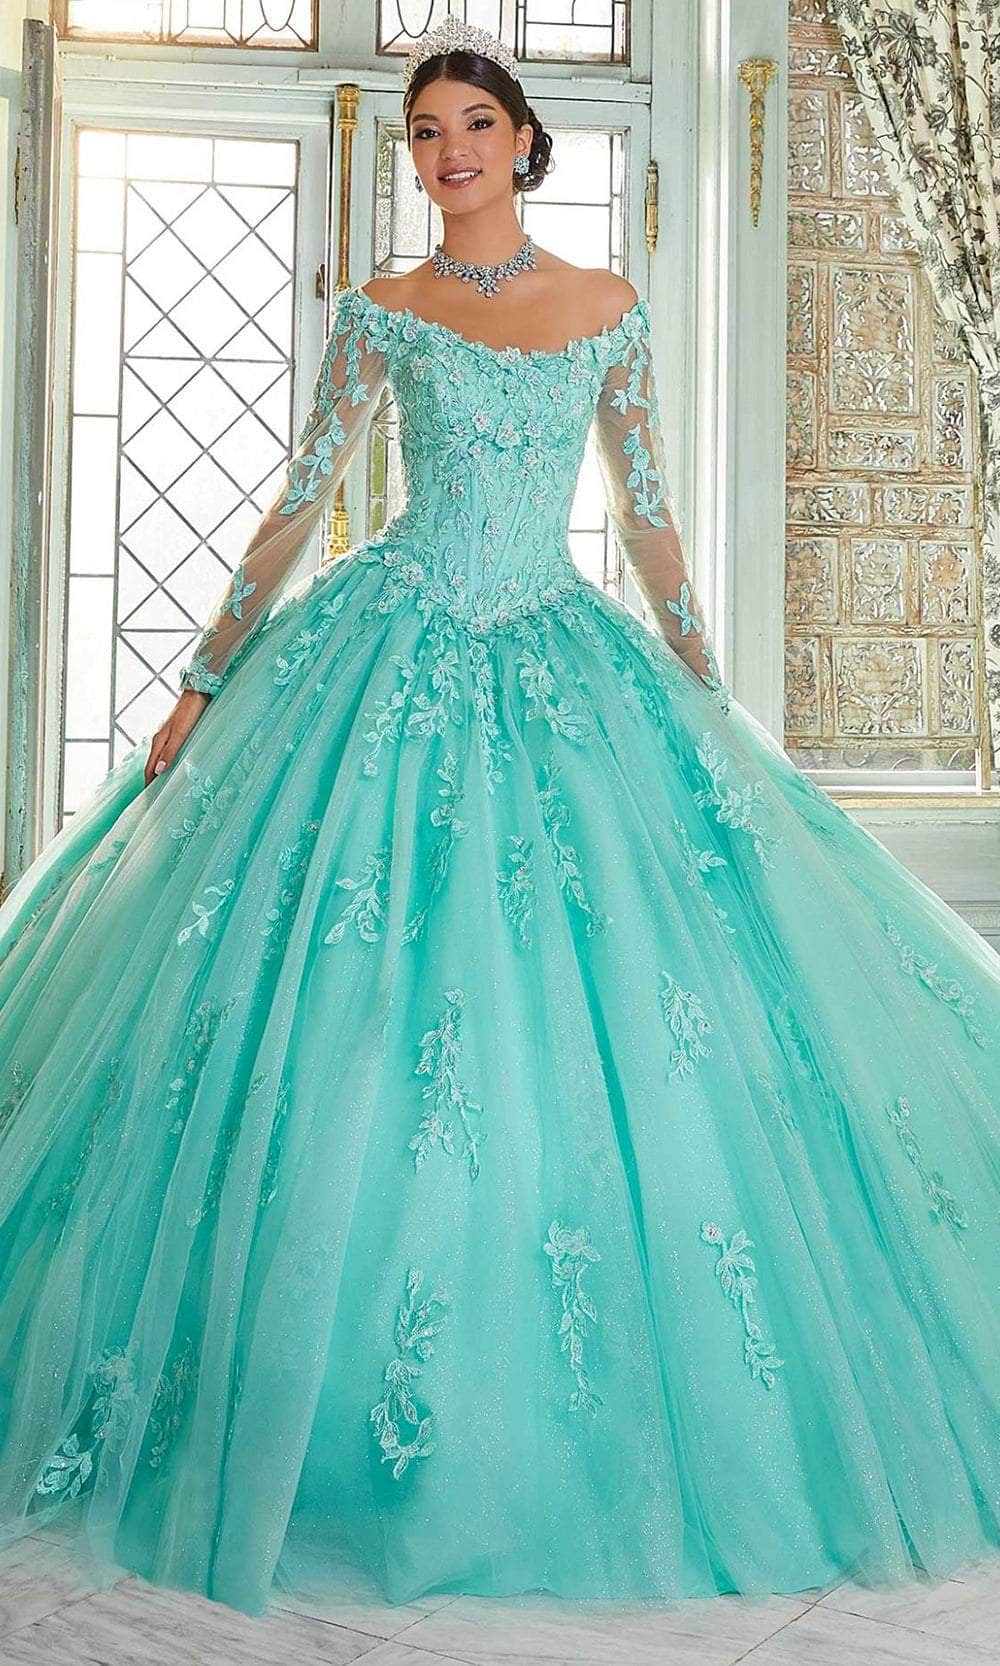 Image of Mori Lee 89339 - Embroidered Tulle Quinceanera Ballgown